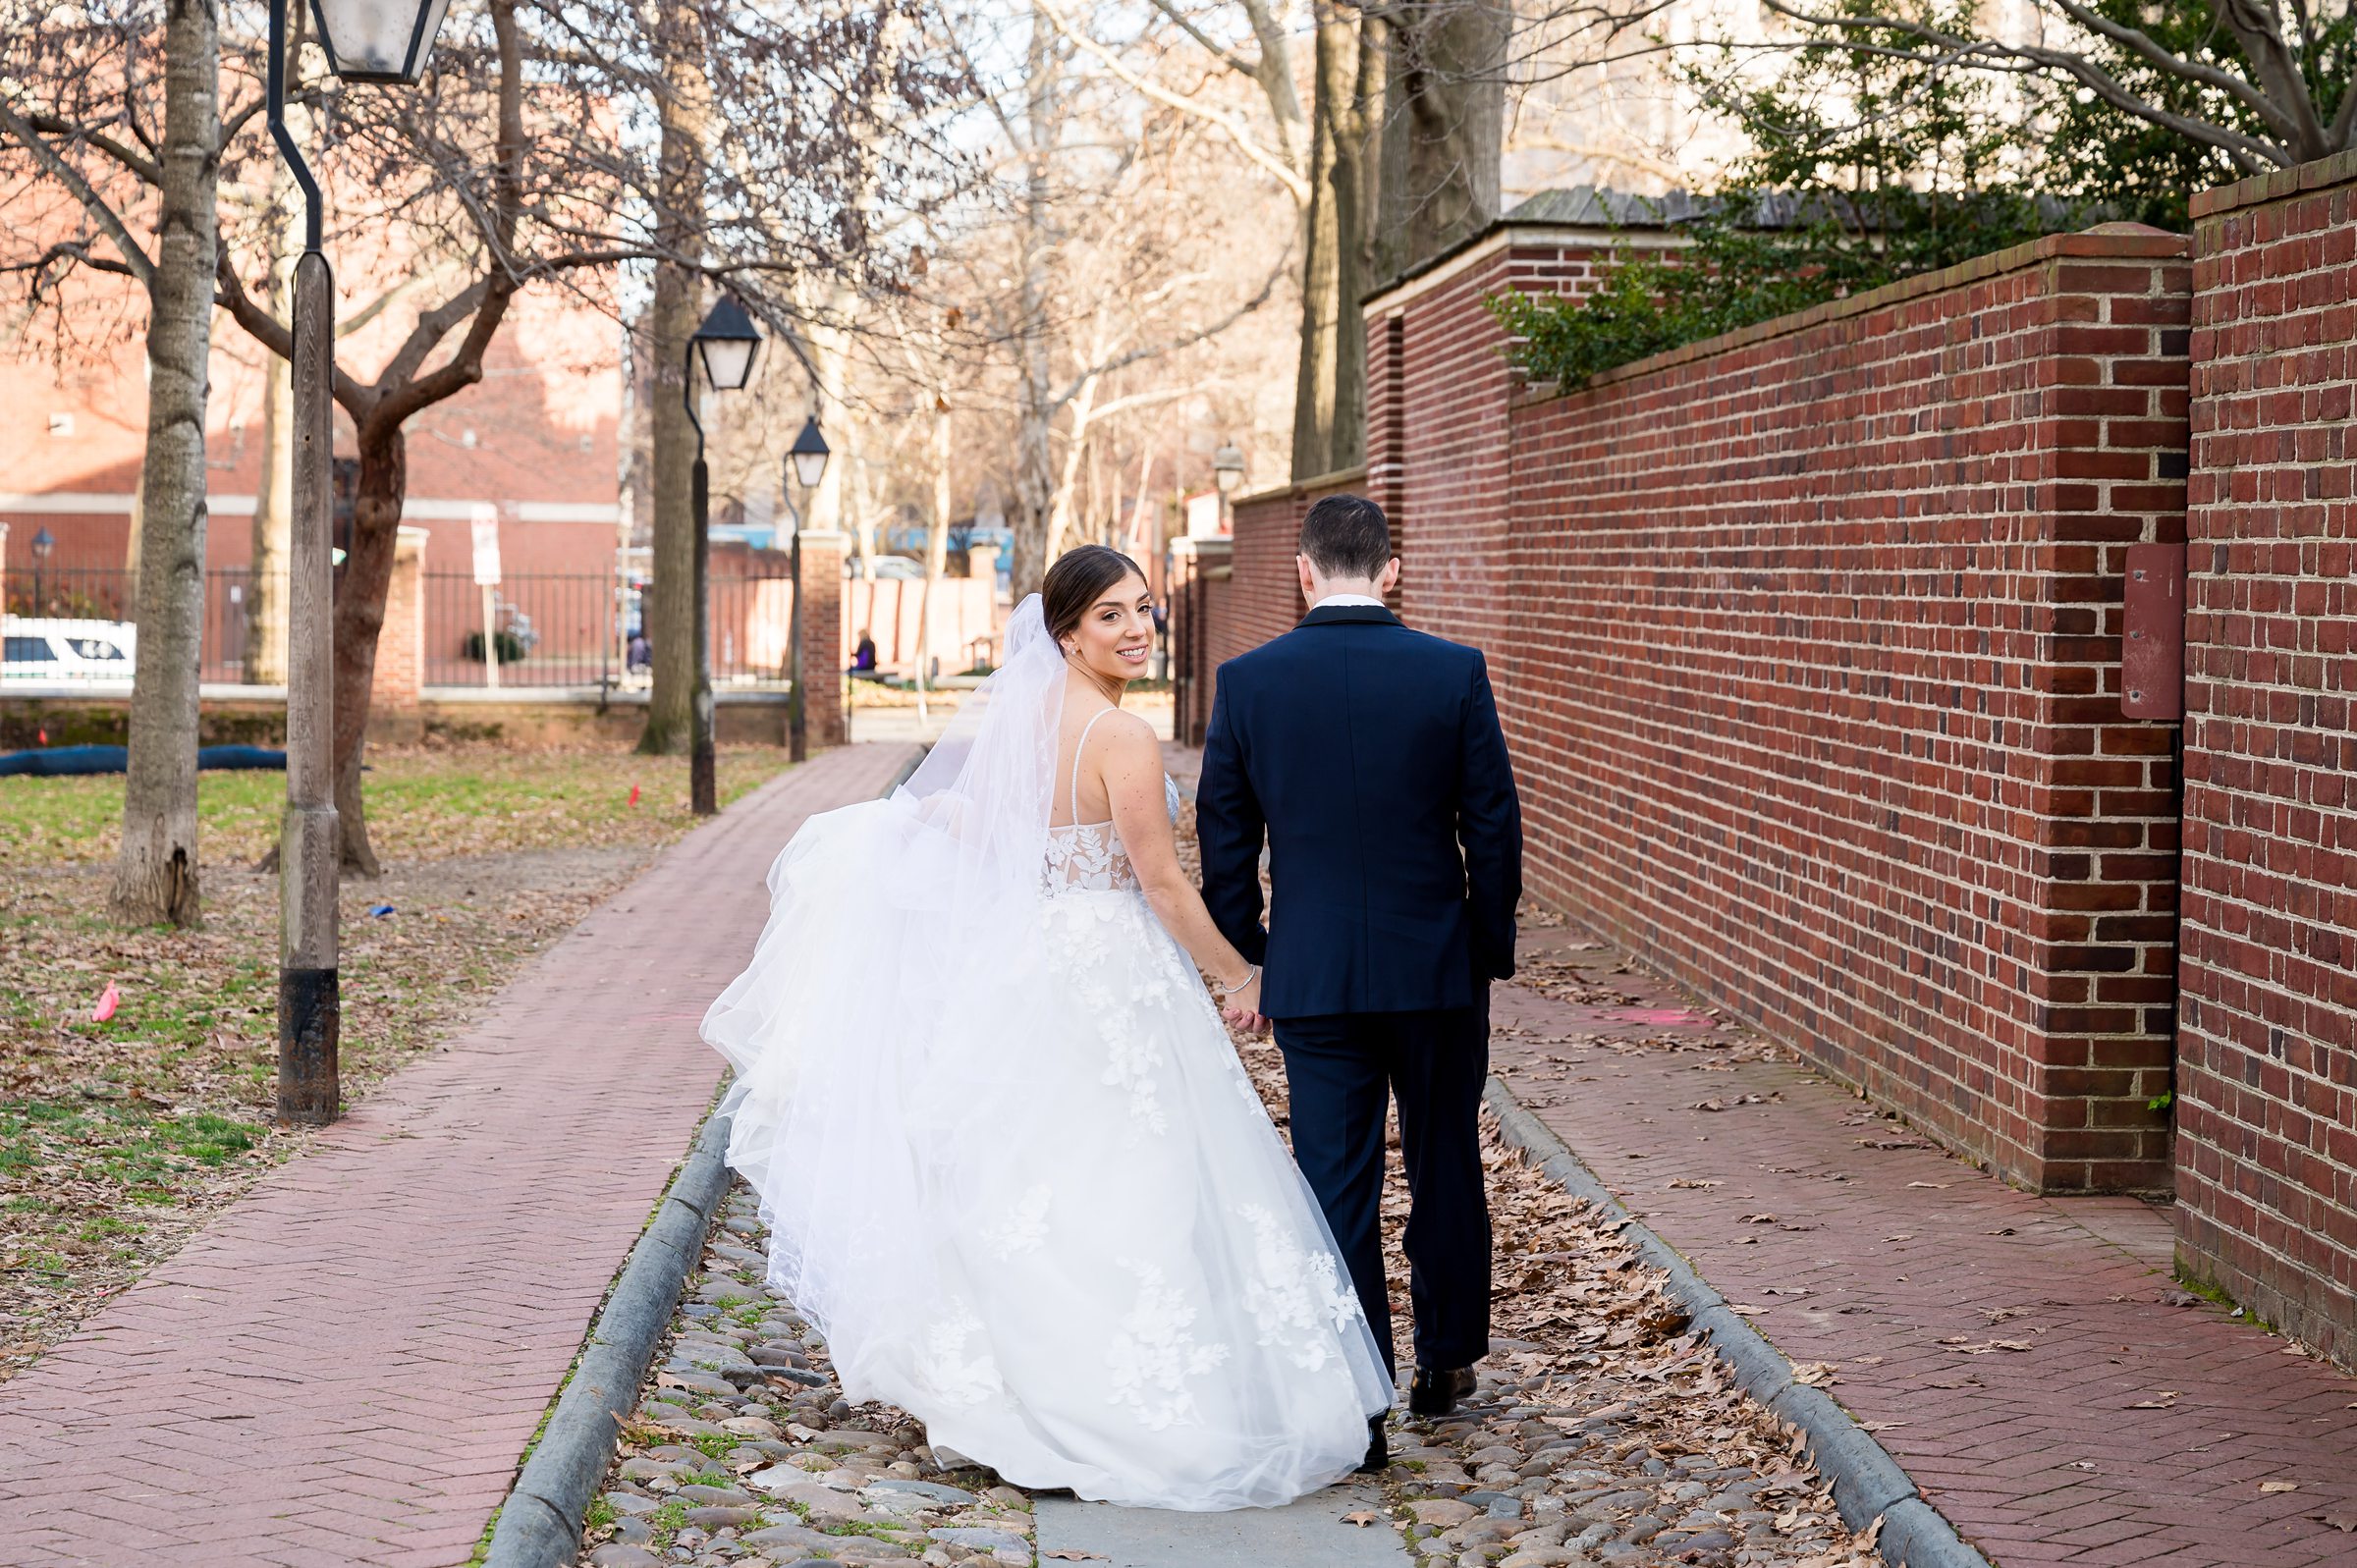 A bride and groom walking down a brick walkway at their Lilah Events wedding.